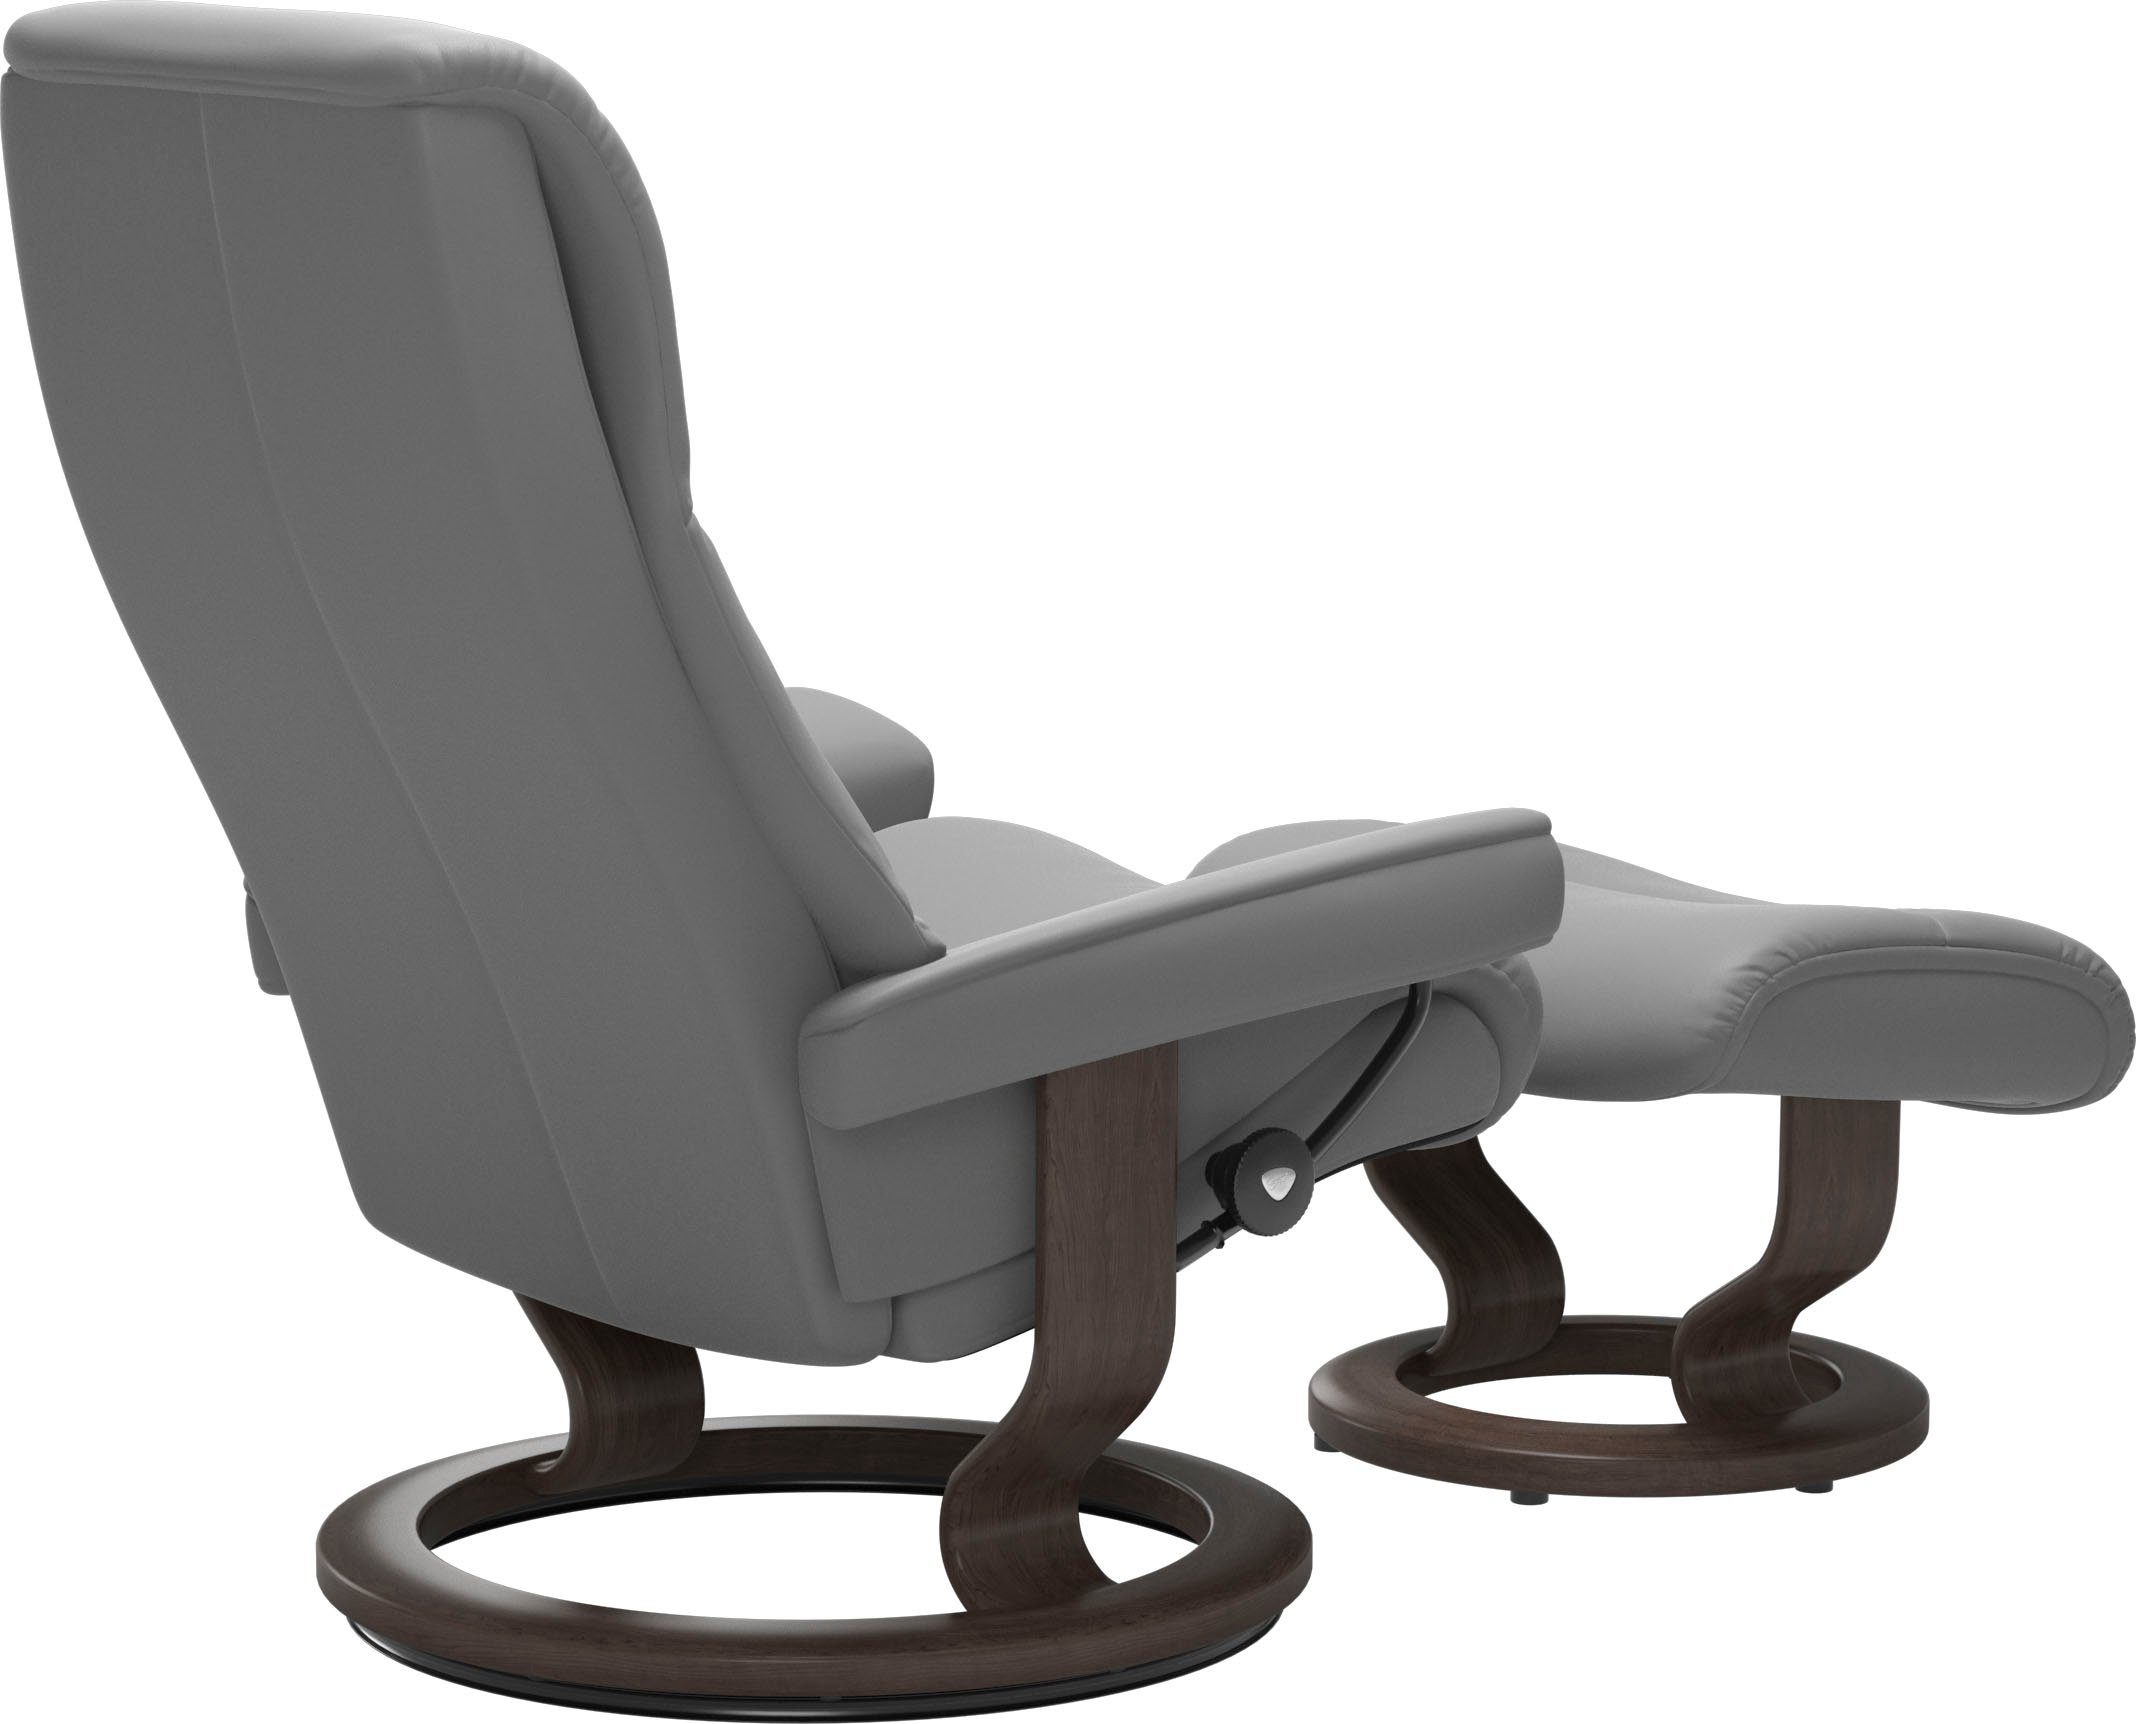 Stressless® Relaxsessel Base, Classic Wenge View, S,Gestell mit Größe